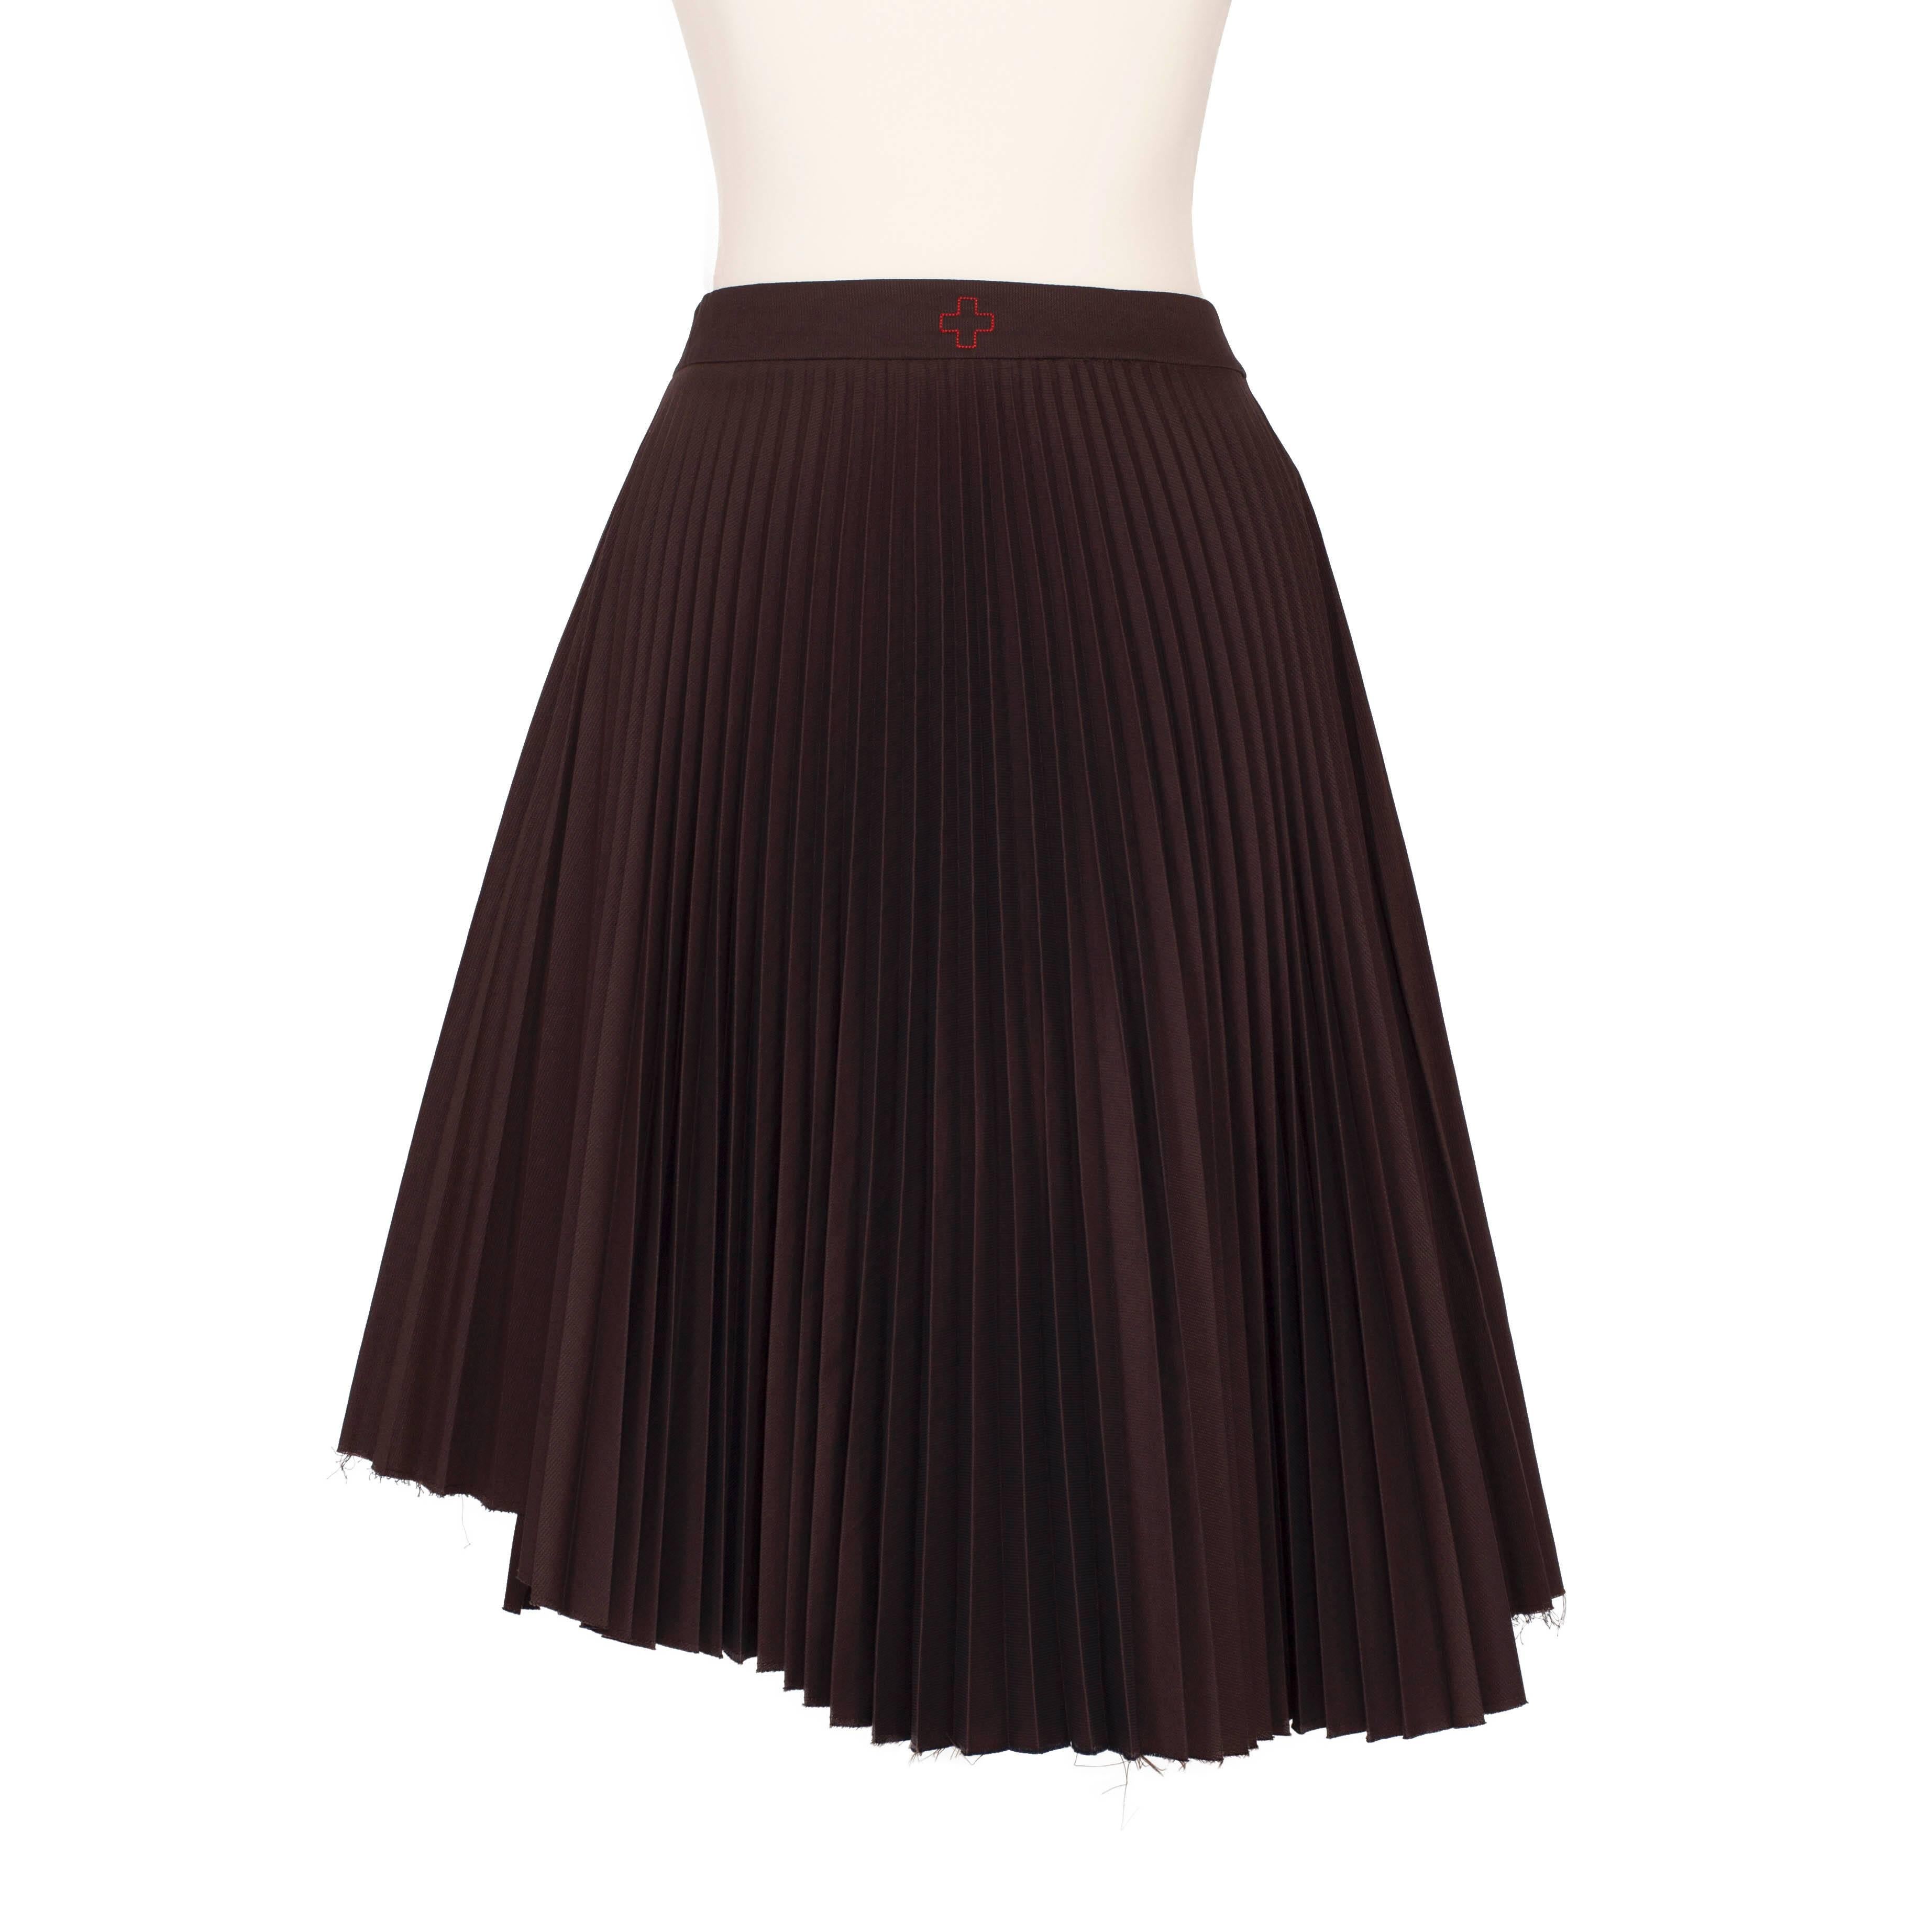 Rare A.F. Vandevorst sculptural wrap pleated skirt in dark chocolate brown from 1990s.
Featuring double buttons at the top waist band and pleating throughout the knee length skirt. Amazing piece.

Size 36 - 38 EU / 6 US